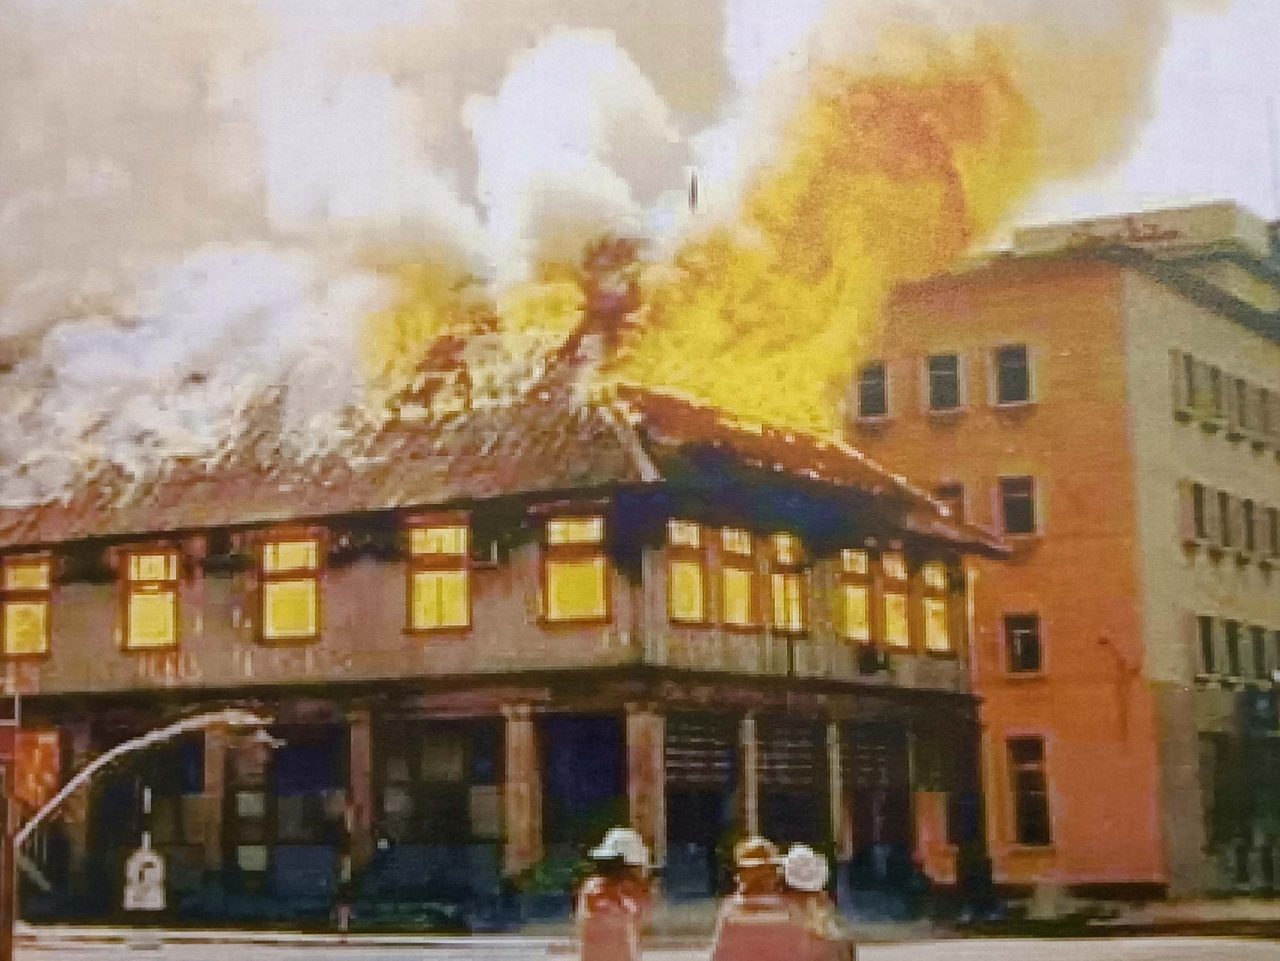 old photo: Former Land and Survey Department building burnt down on December 31st 1992